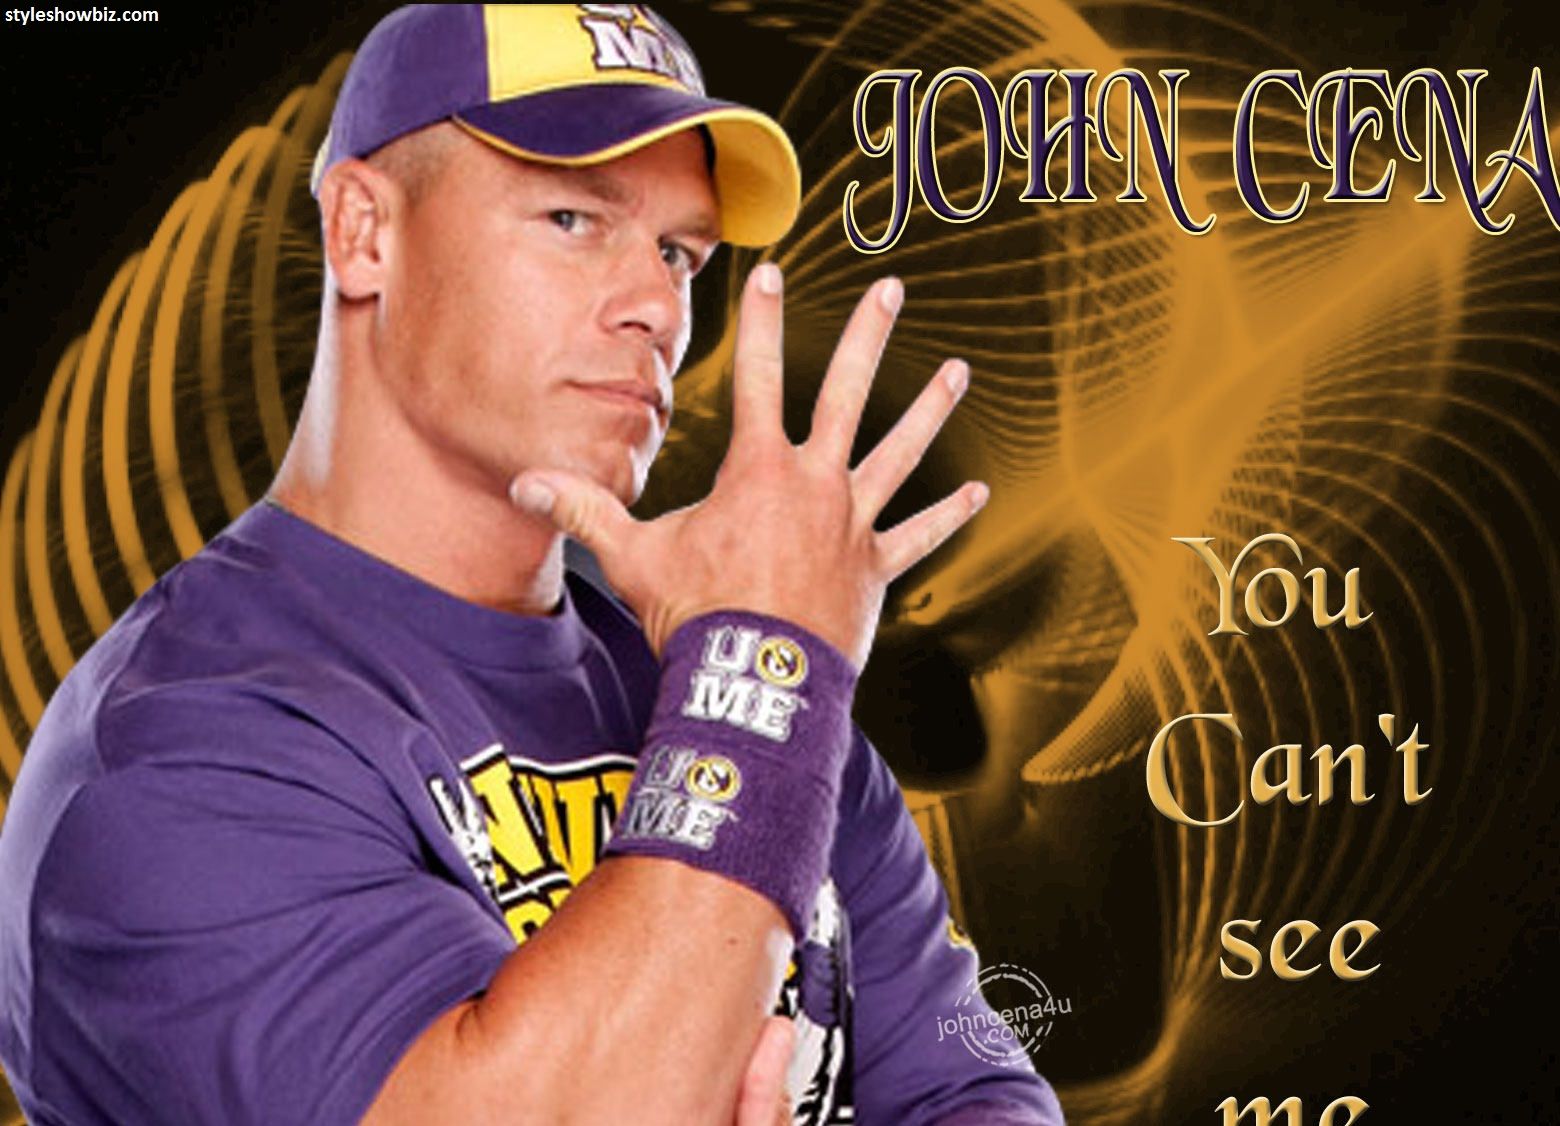 John Cena The Marine hd wallpapers ›› Page 0 | ForWallpapers.com